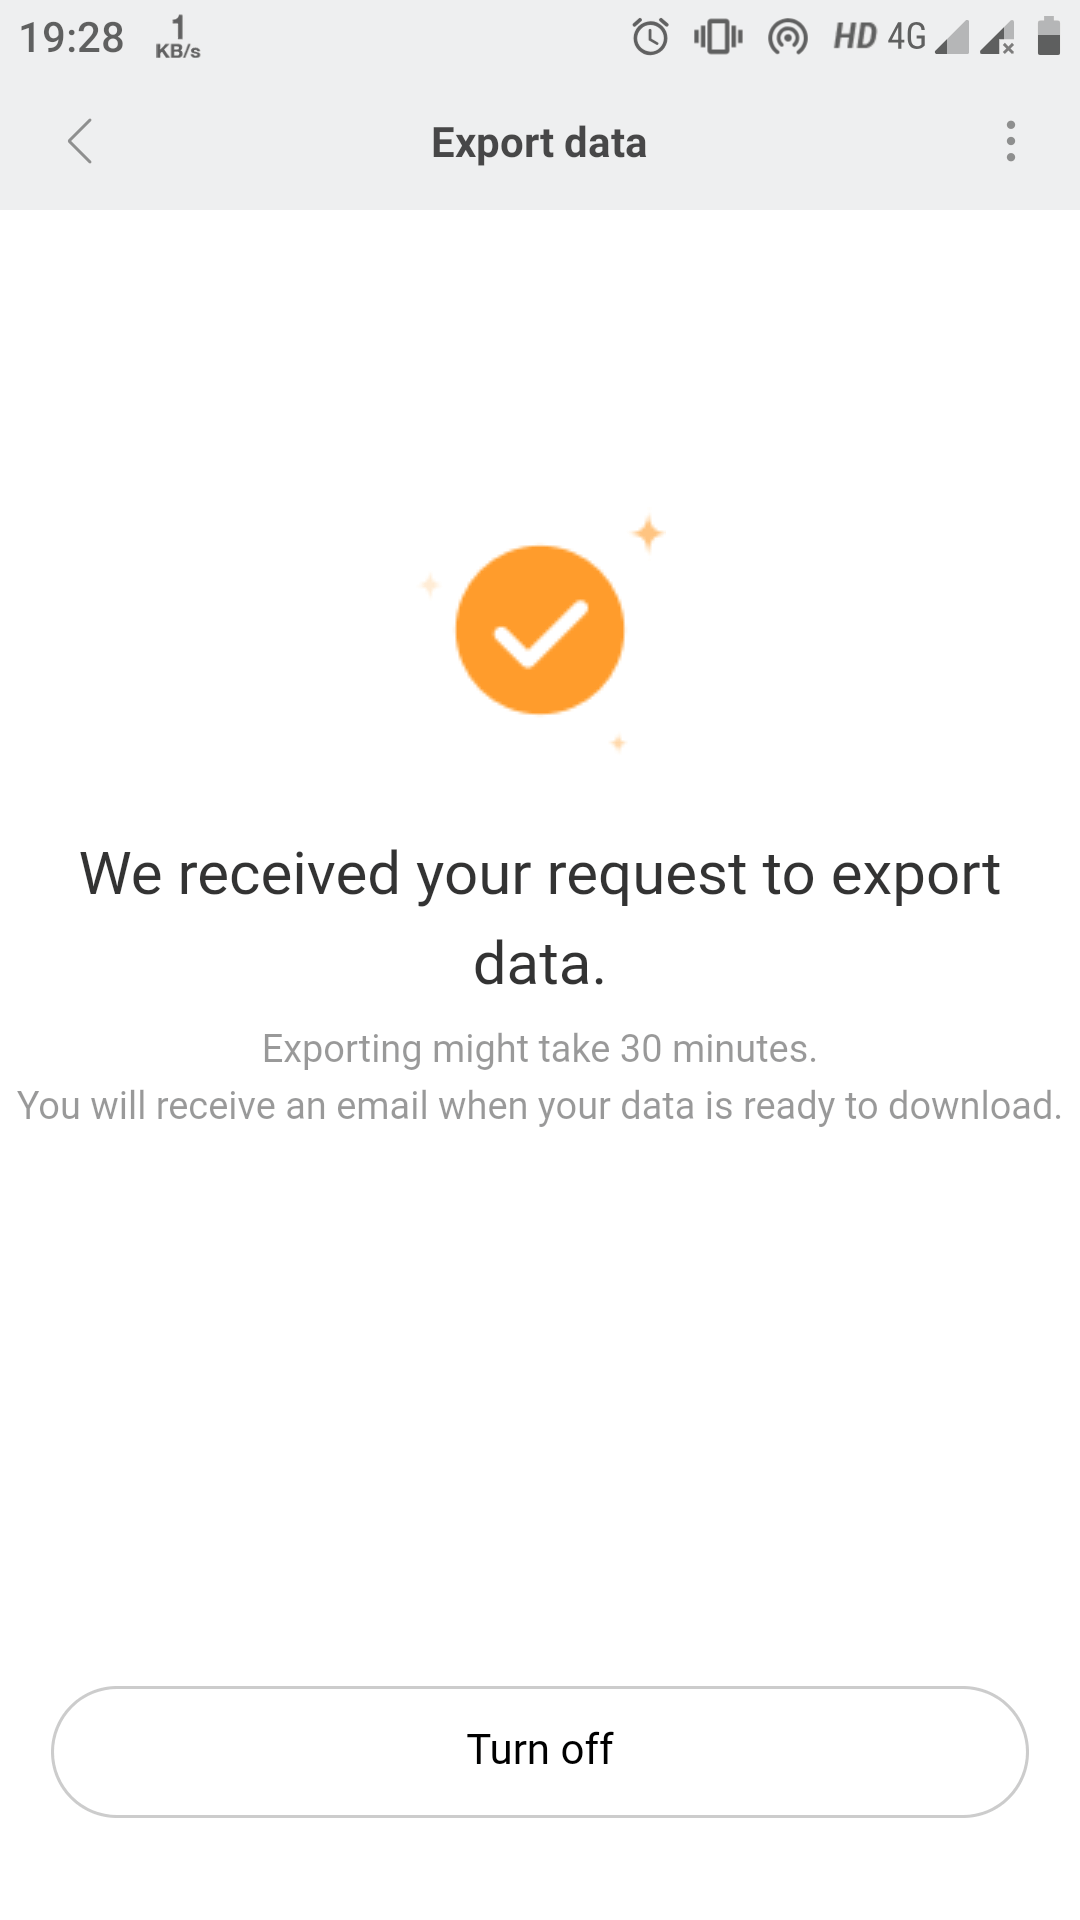 Exporting data - confirmation